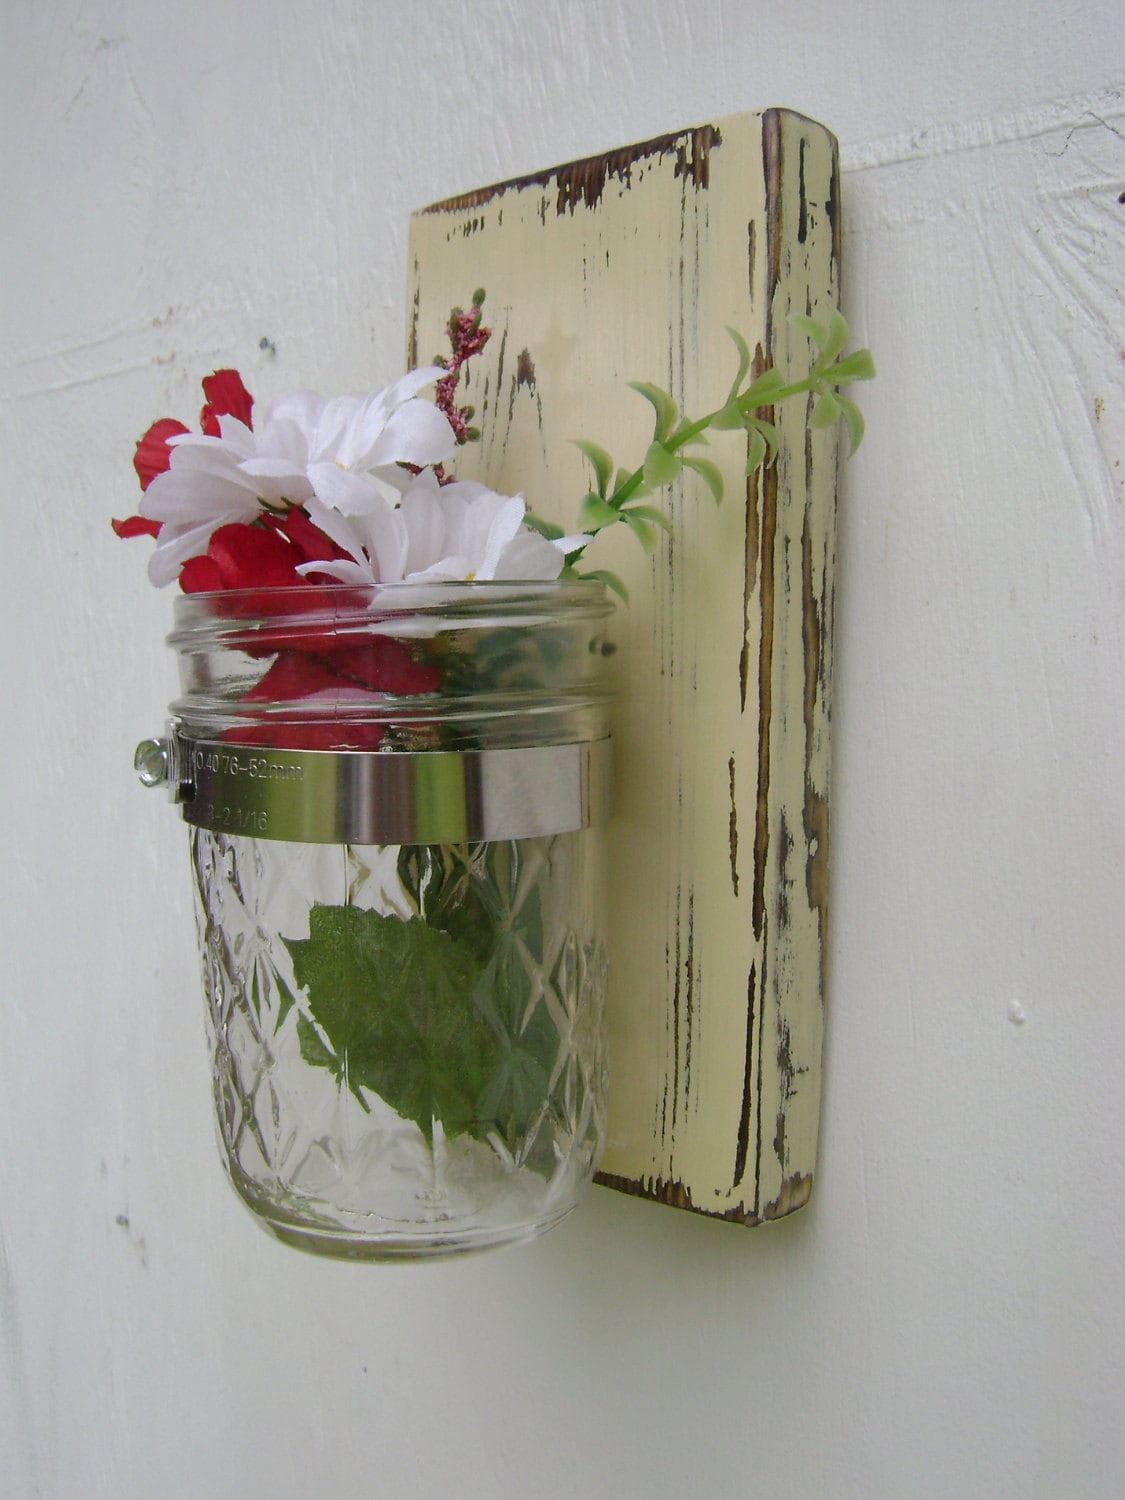 country vase shabby chic wall sconce mason jar by UncleJohnsCabin